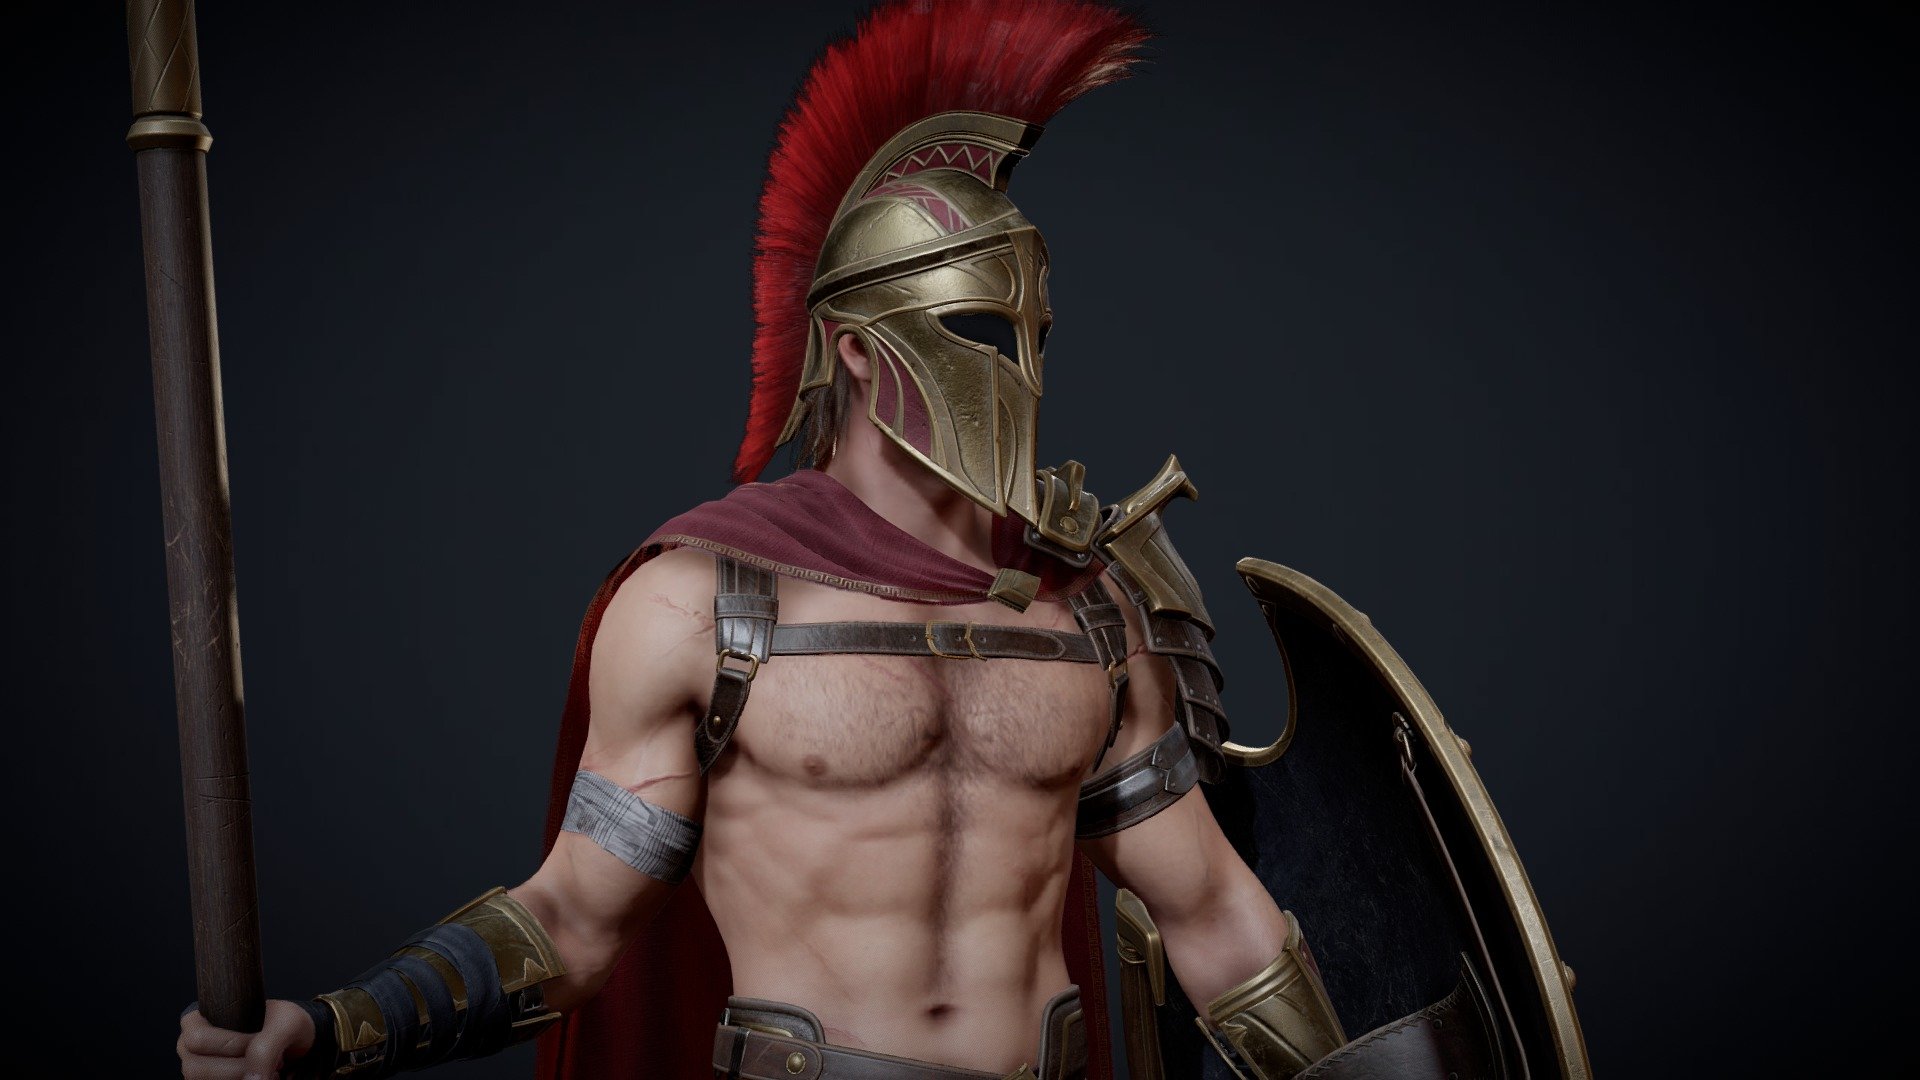 Product name: Spartan Hoplite

Ancient Greek Warrior, wearing not so practical armor for showing his abs!

Full Preview Gallery: https://www.artstation.com/artwork/4X53dW


Low poly, game ready, rigged, PBR textures. Include nude body mesh. UE4 supported.
Total tris counts: 140,117 
Unit: centimeters. Model Height: 184cm
FBX folders contain premade combined fbx for Full Armor, Half Armor, Full Nude meshes. And Modular folder for individual parts
Full genital modeled.
UE4 project with playable blueprint and cloth physics.
.blend file. Blender 3.2. Fully rigged with Auto Rig Pro plugin.
3Ds Max and Maya scene with UE4 skeleton setup.
PBR textures (Metallic-Roughness) 2048X2048 and 4096x4096. DirectX Normal Map.

Textures can be found in this folder: RyanReos_SpartanHopliteAssetsTextures


Include Zbrush .ztl file for full character model and weapon!

After purchase, please download the product archive &ldquo;RyanReos_SpartanHoplite_SketchfabVersion.rar